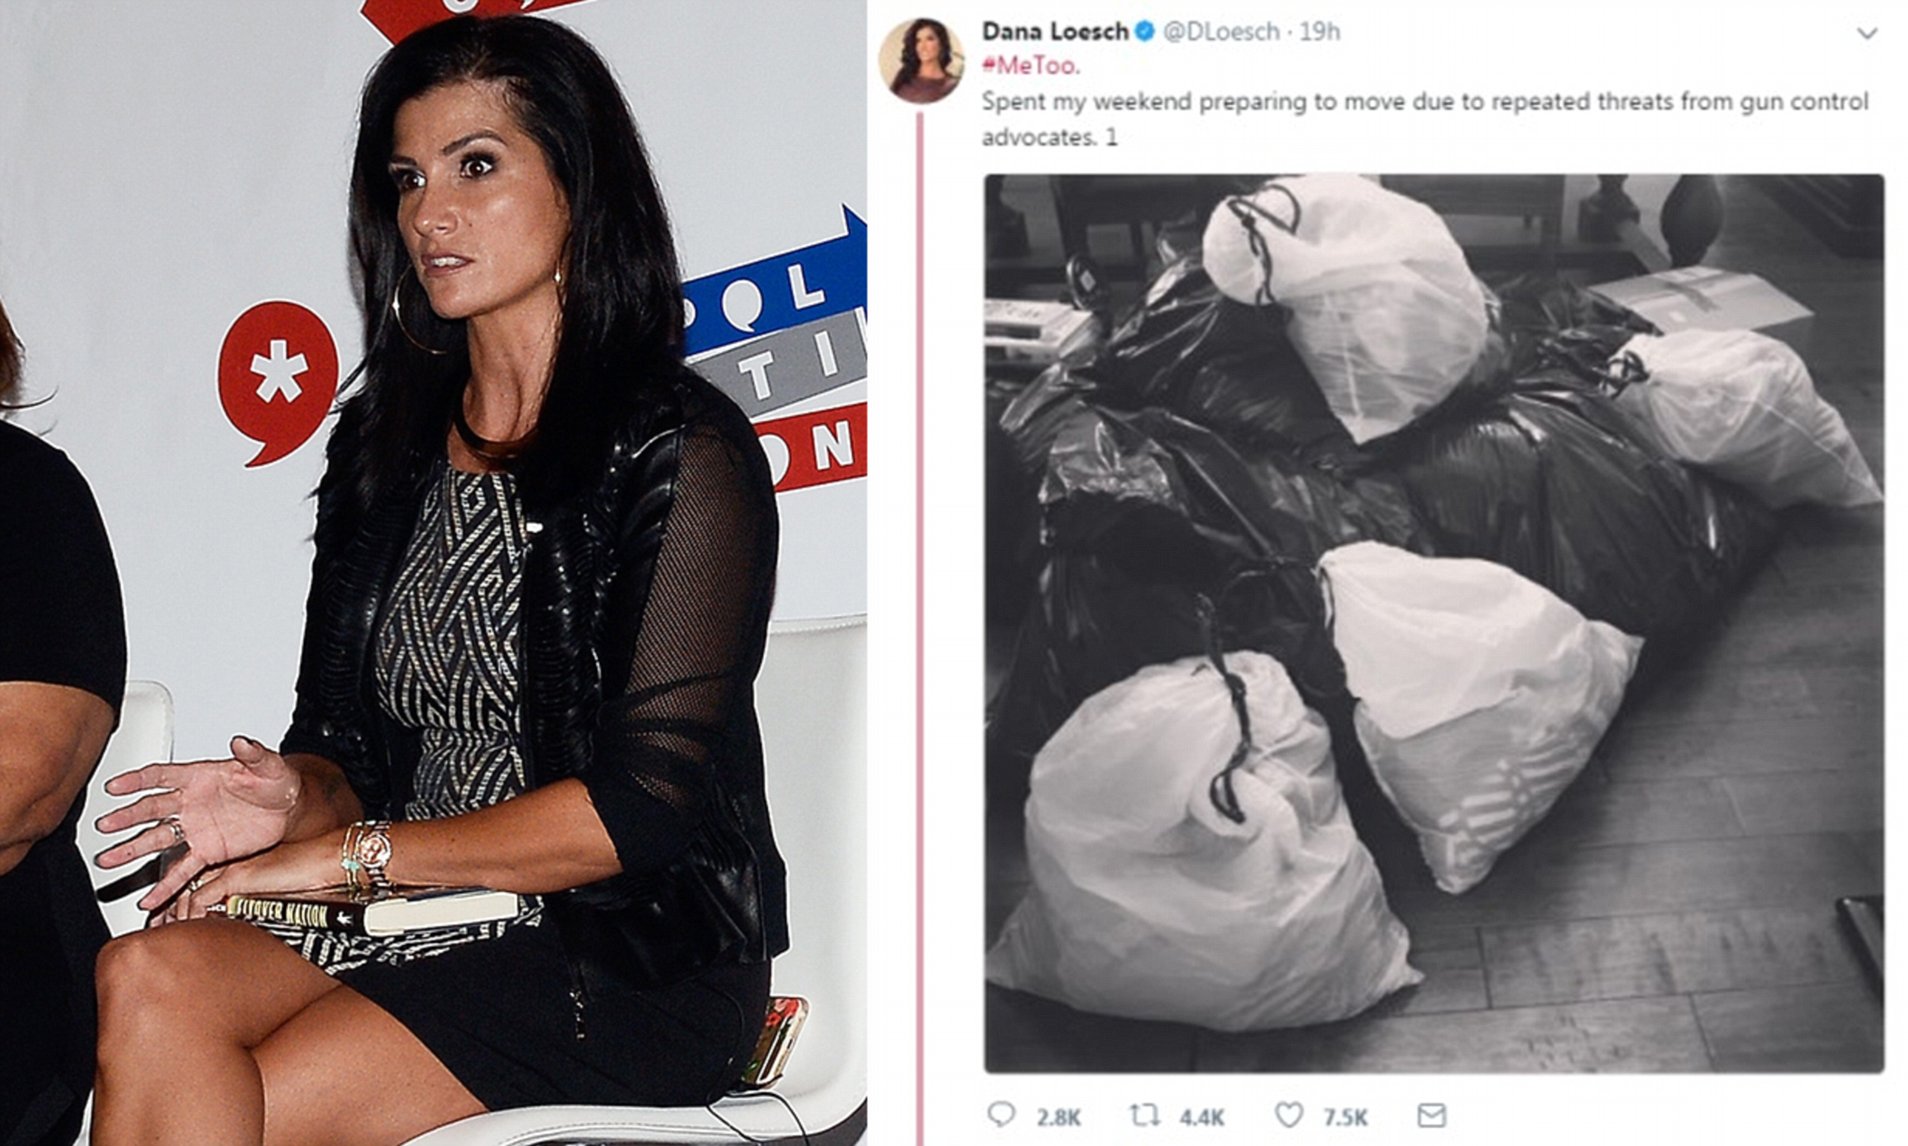 christopher ruff recommends dana loesch naked pic